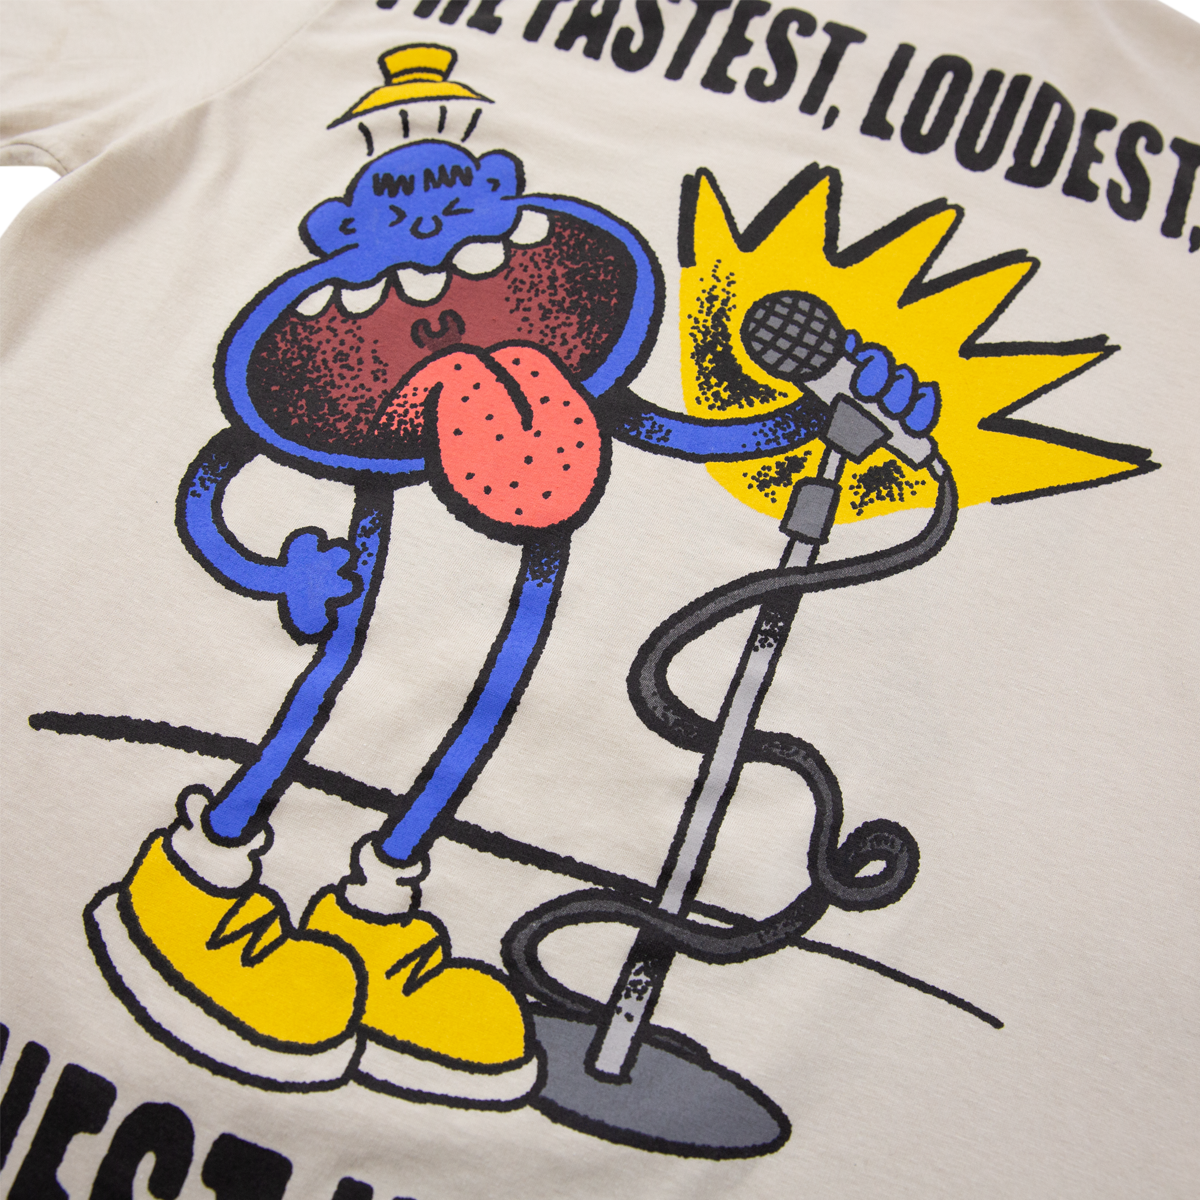 Fastest Loudest Meanest Tee